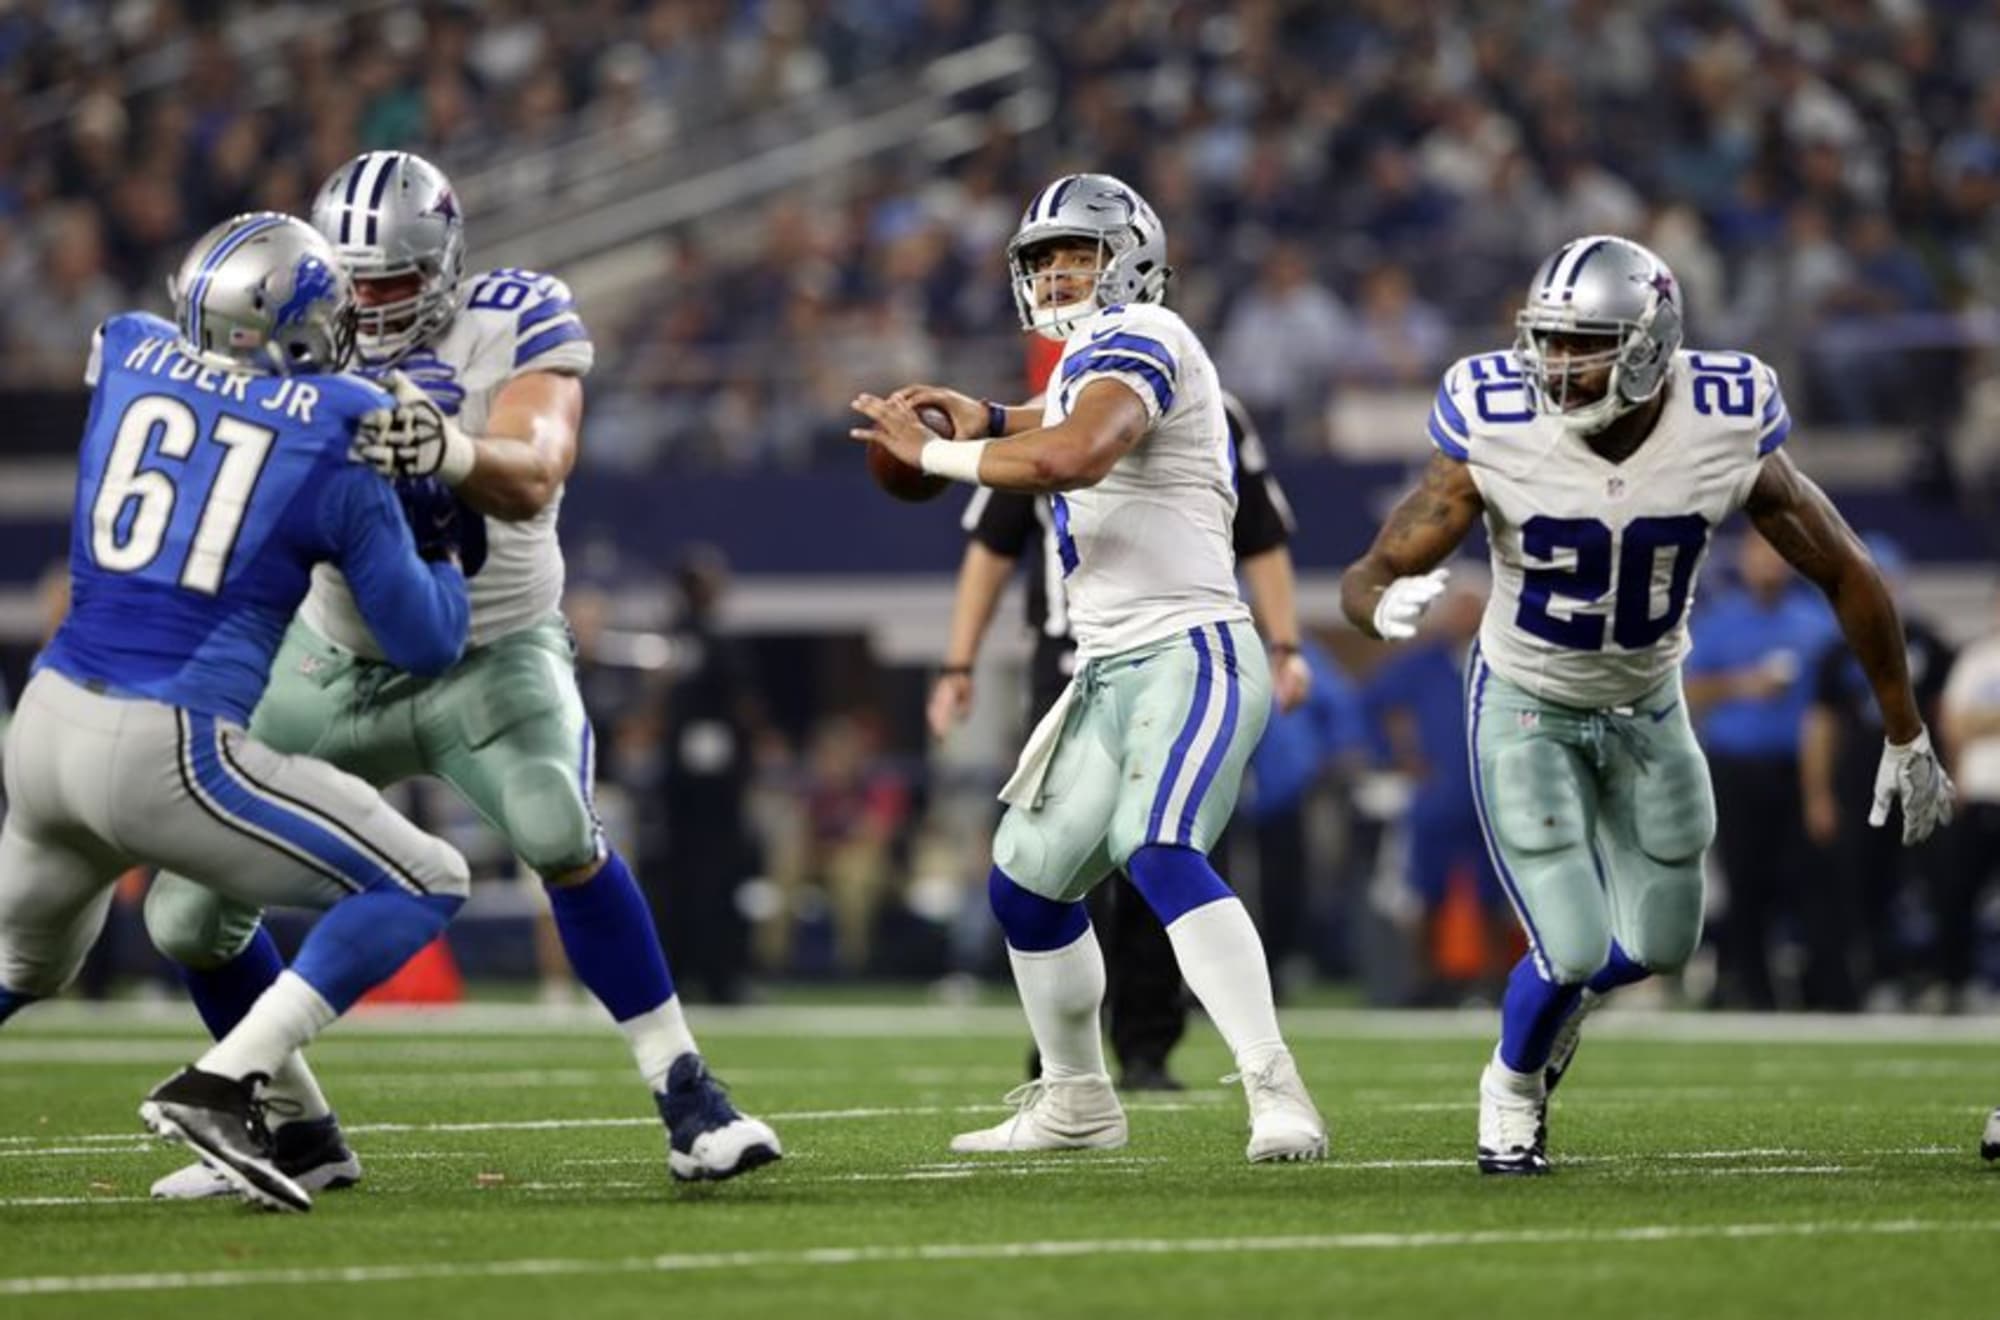 Dak Prescott One of the NFL's Most Accurate Deep Passers